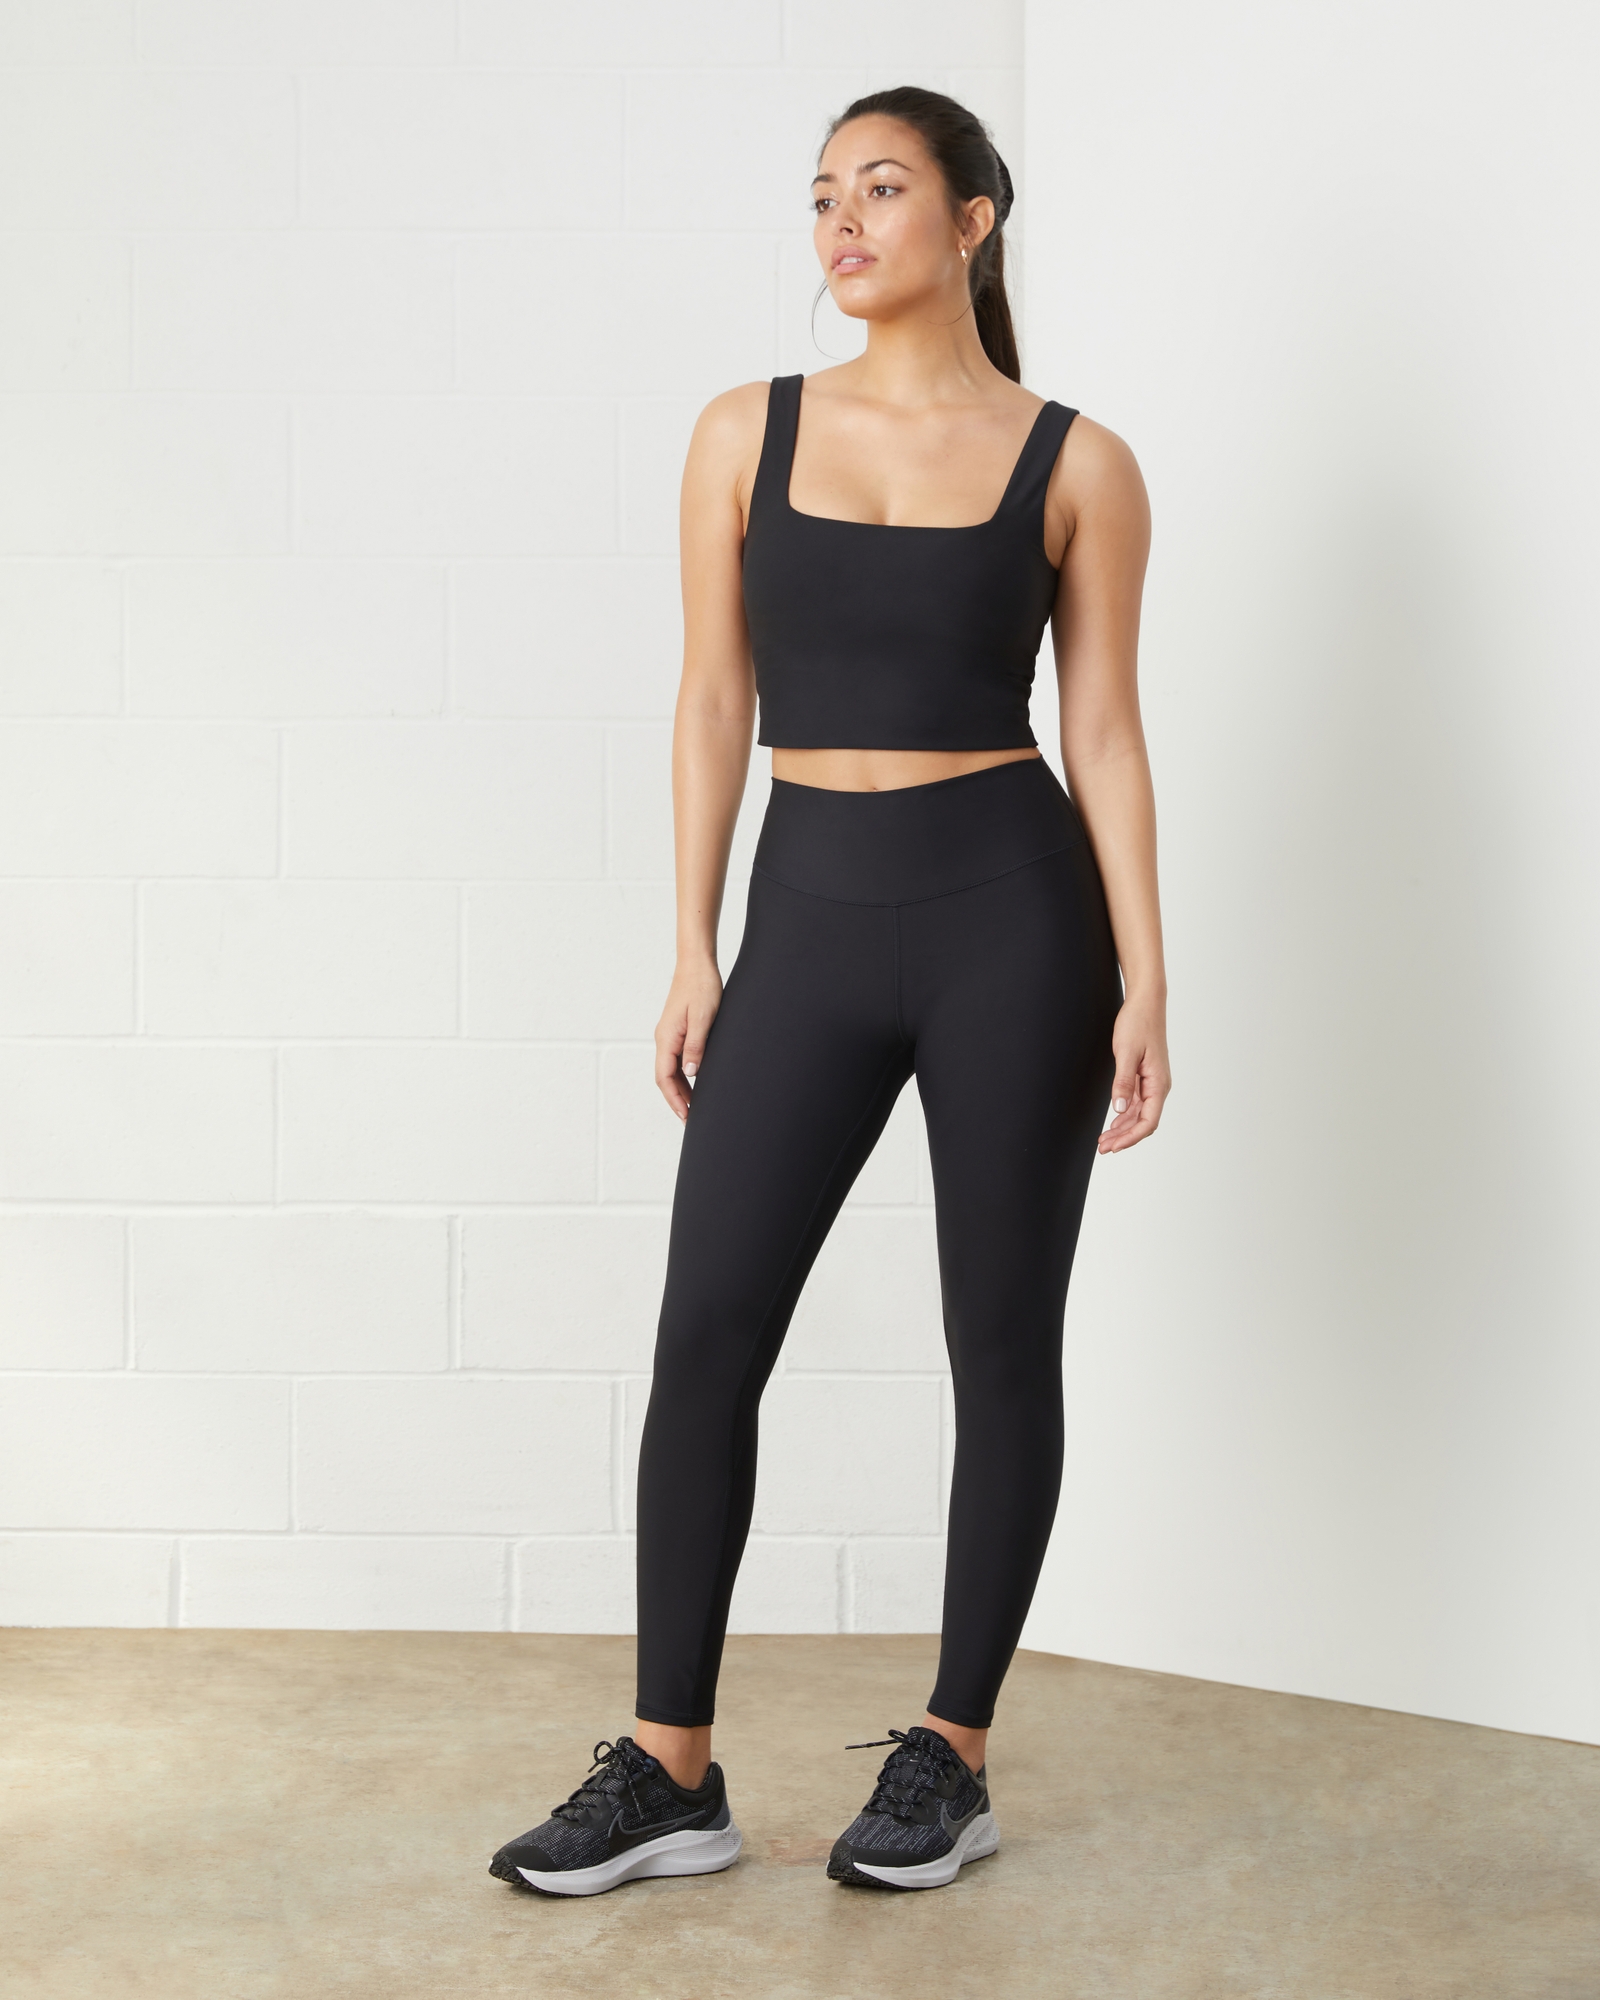 Stretchy leggings – Fit Lux